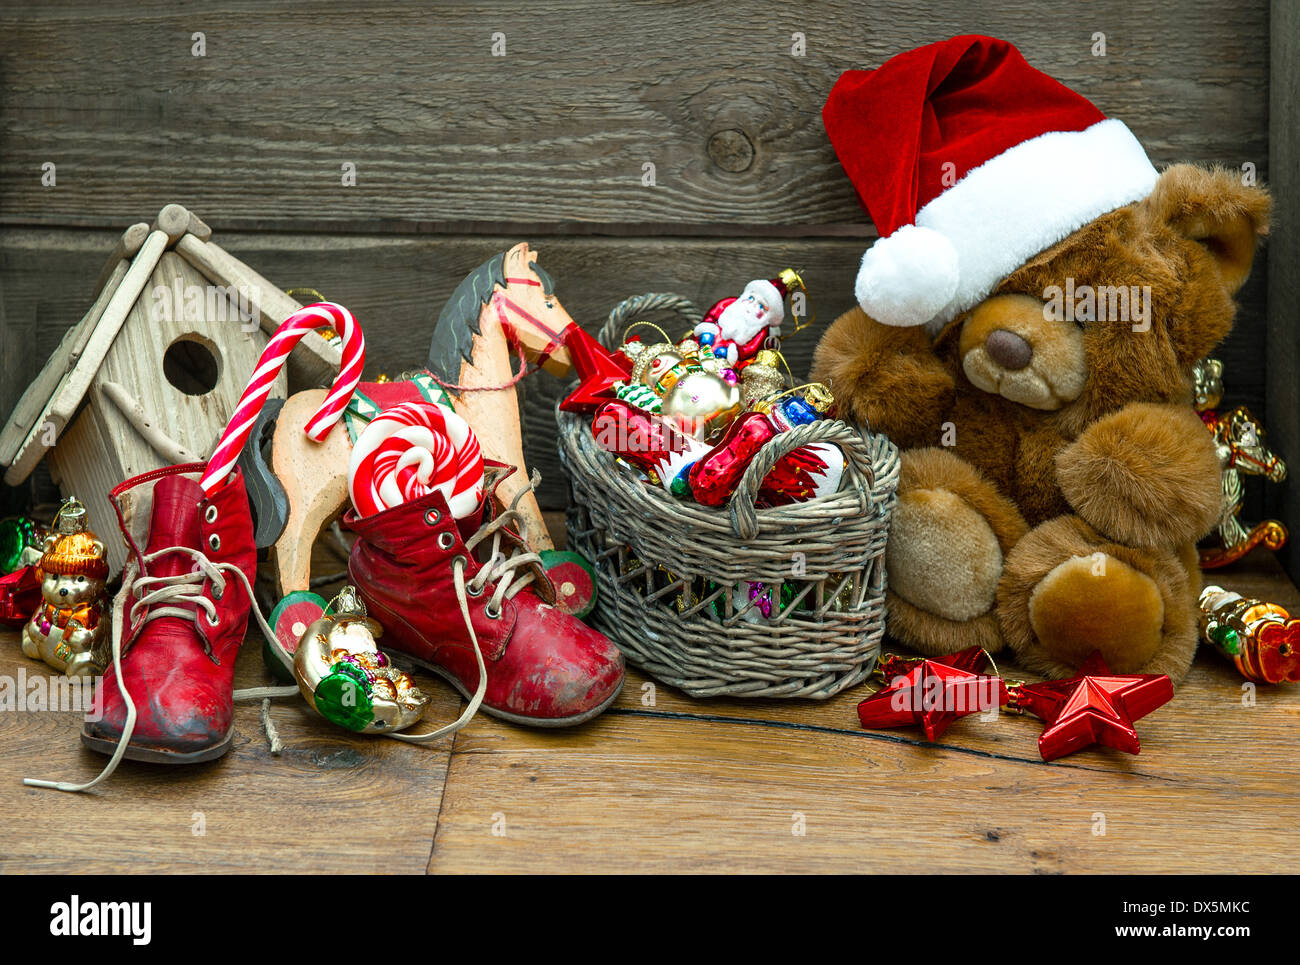 nostalgic christmas decoration with antique toys over wooden background. retro style picture Stock Photo